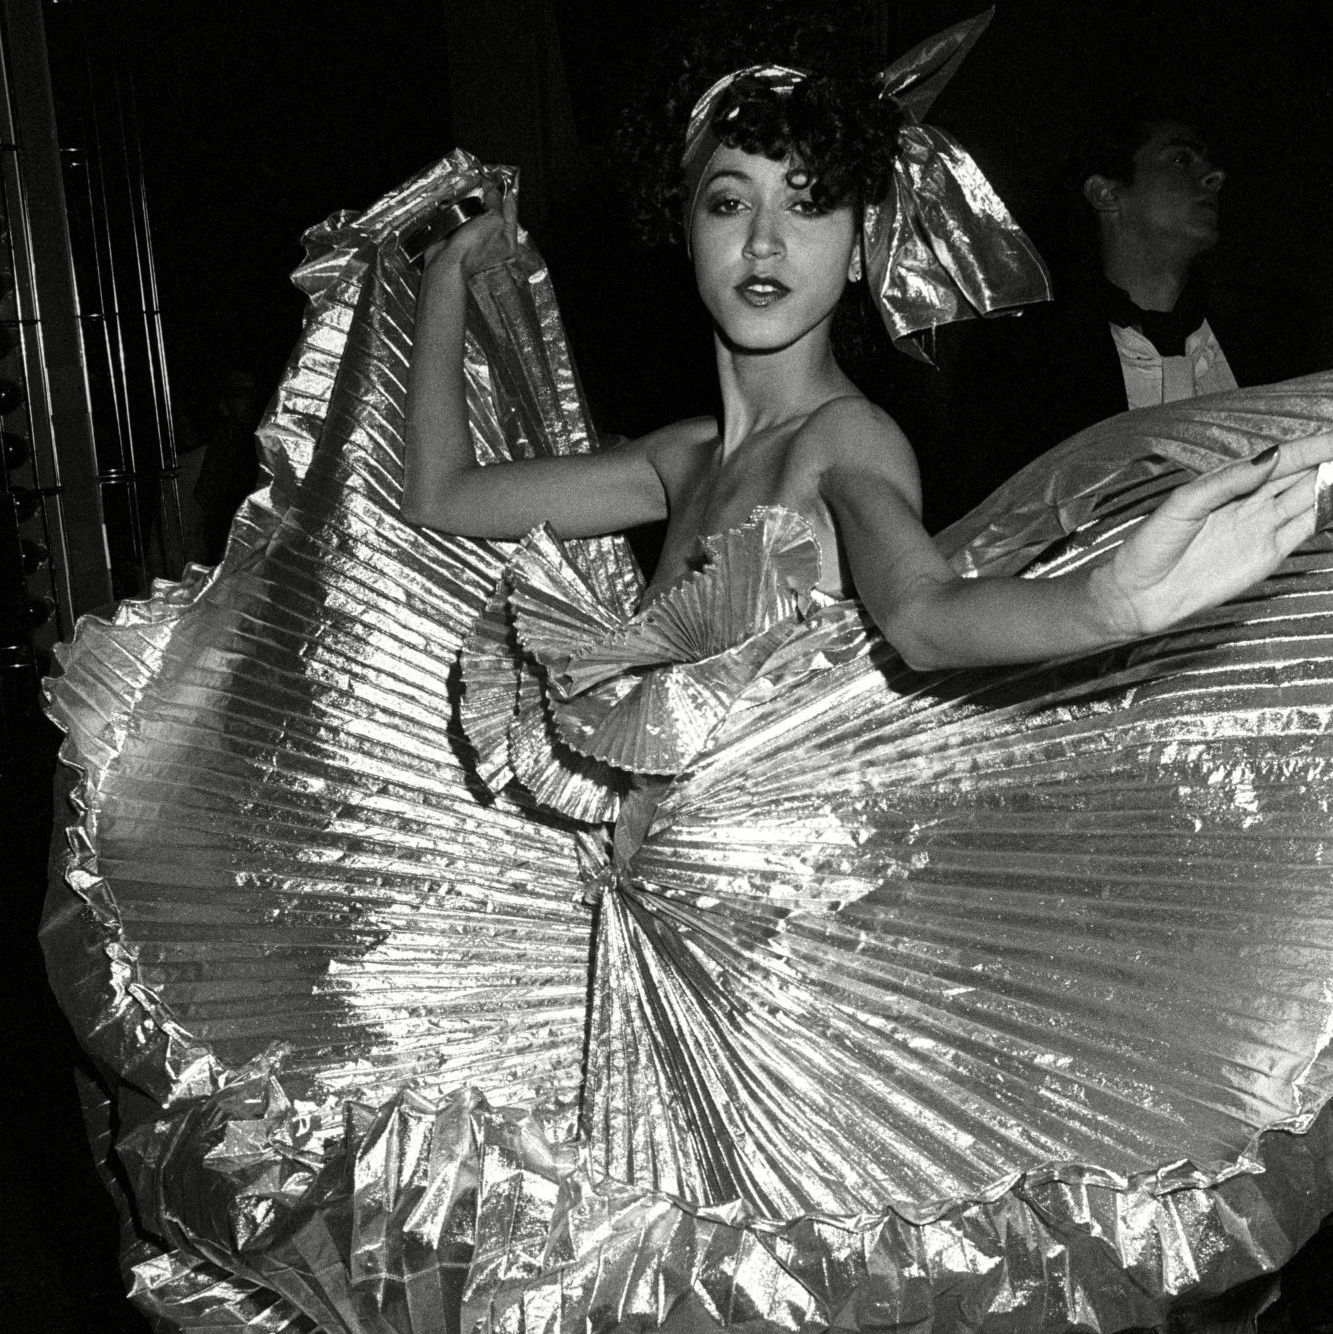 Guy Marineau: Pat Cleveland on the dance floor during Halston's disco bash at Studio 54